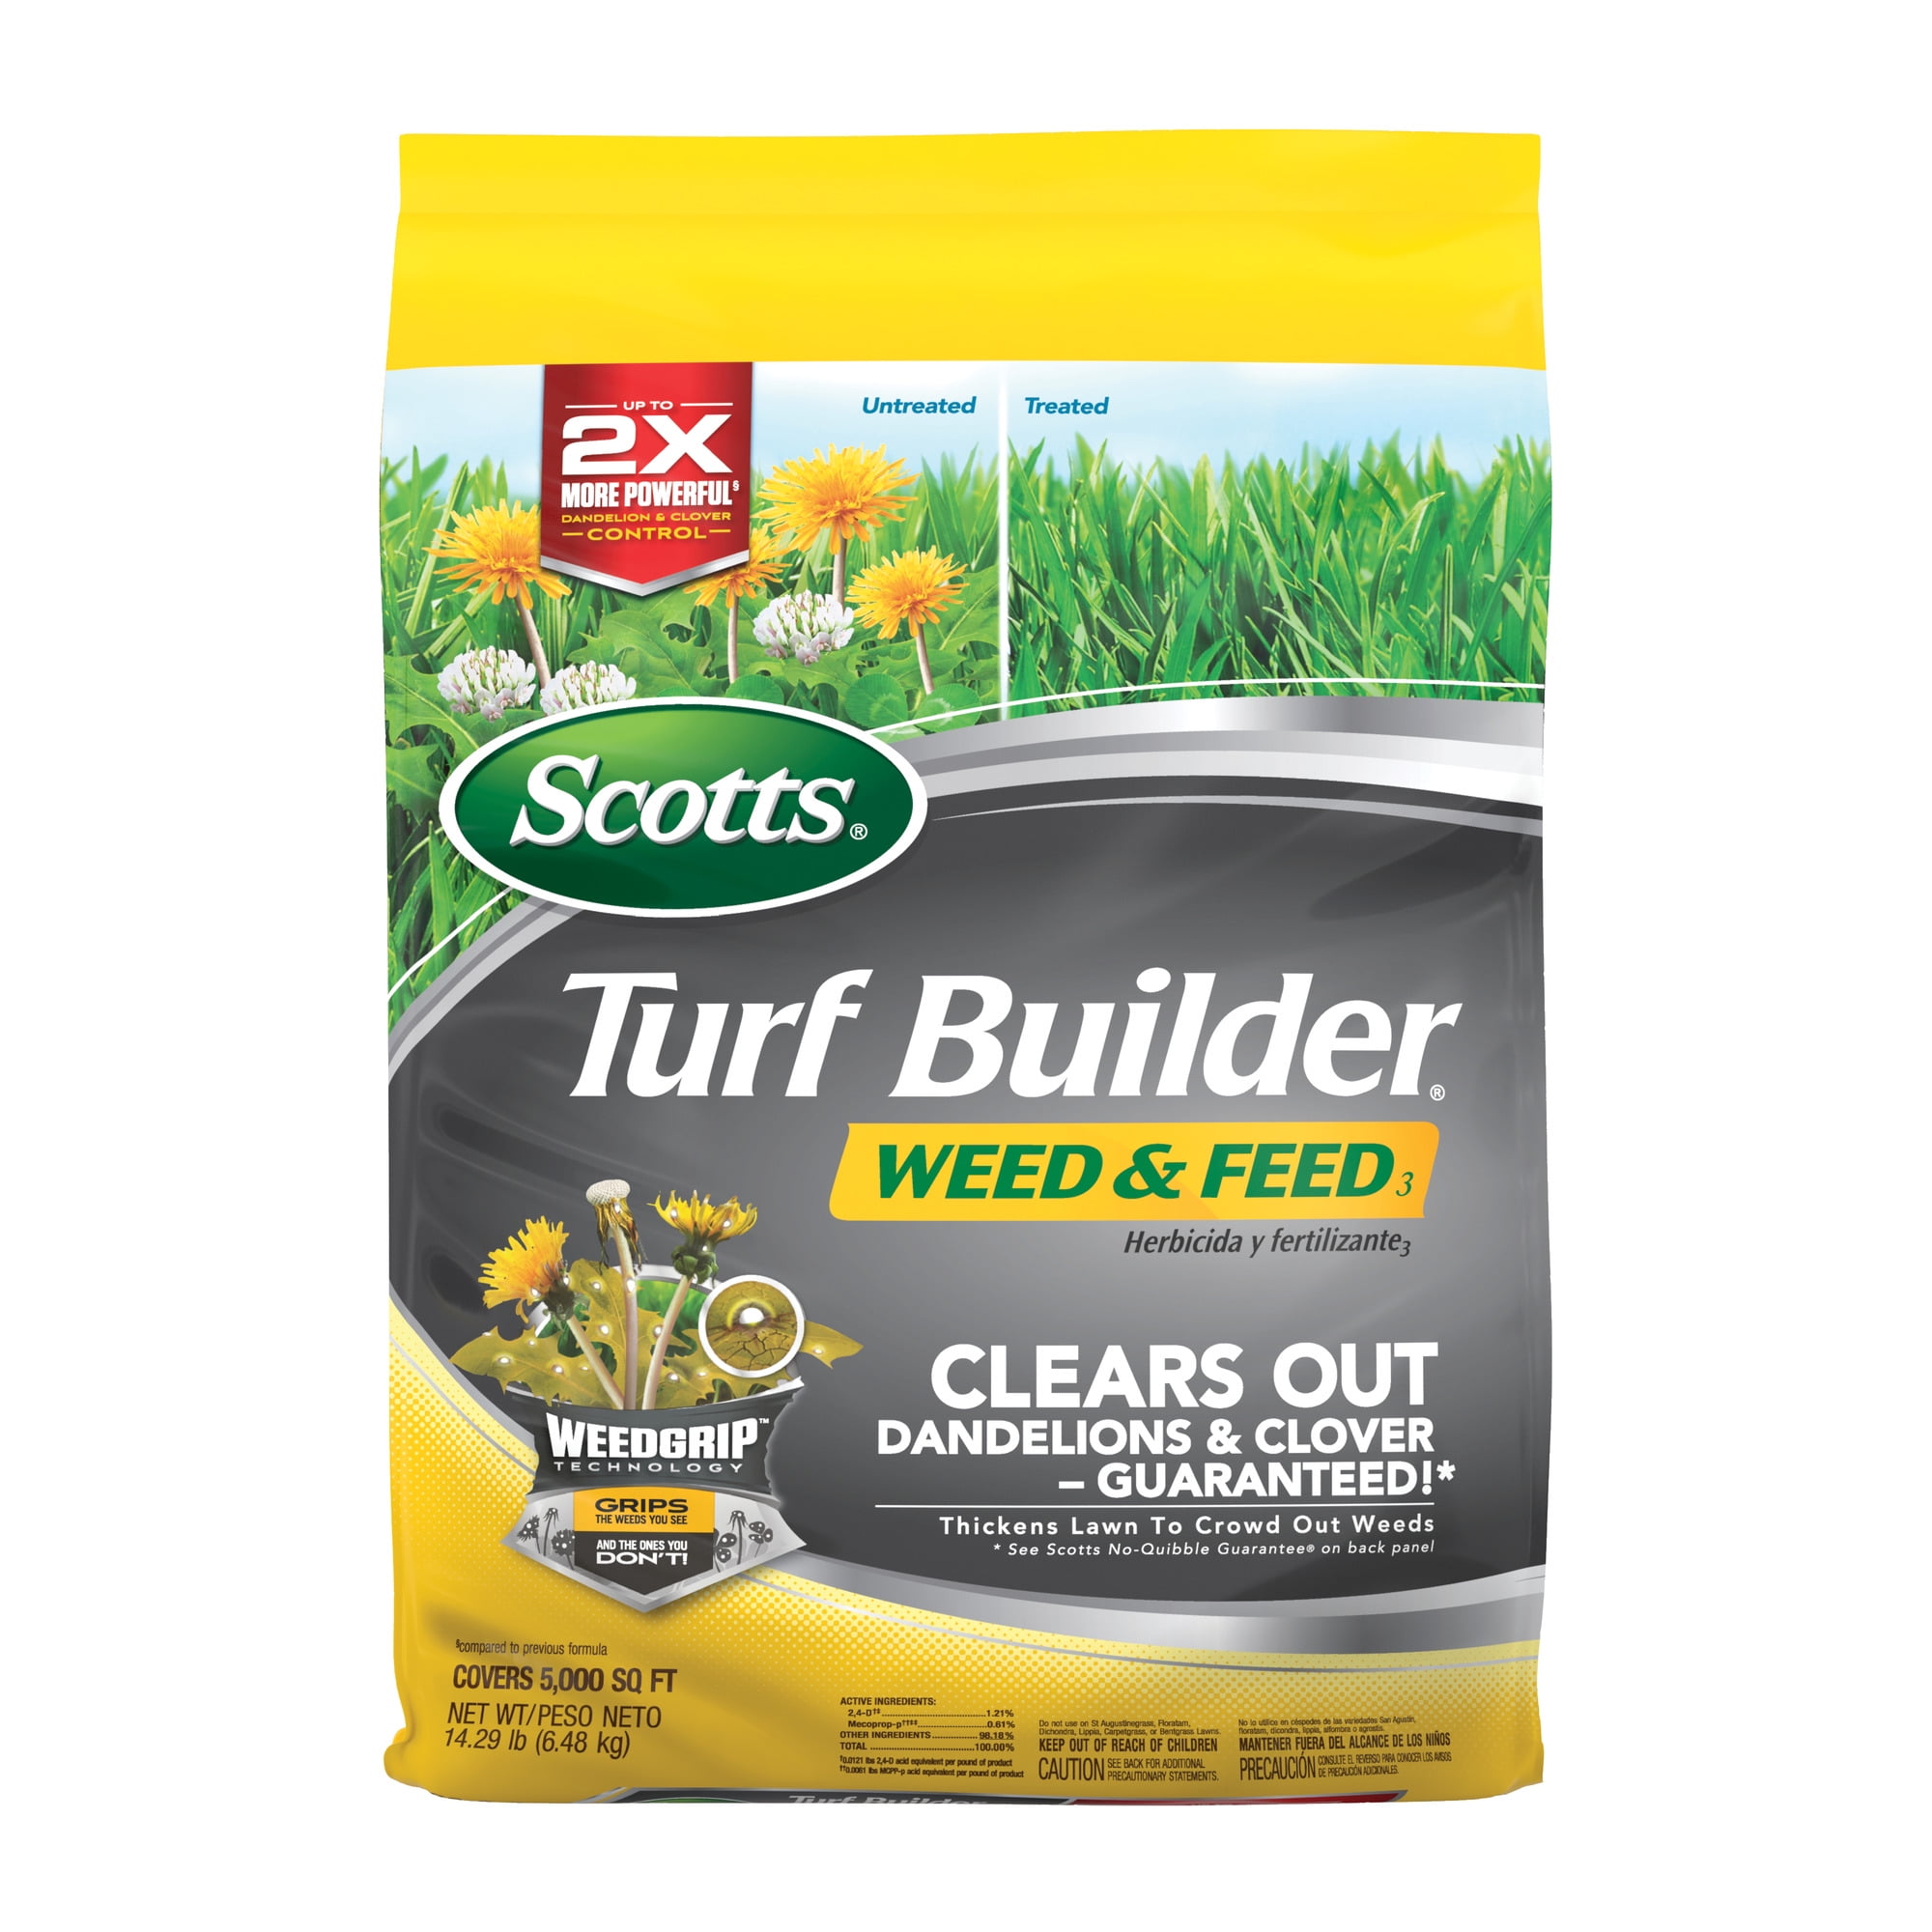 scotts turf builder weed & feed 3, 14.29 lbs., up to 5,000 sq. ft